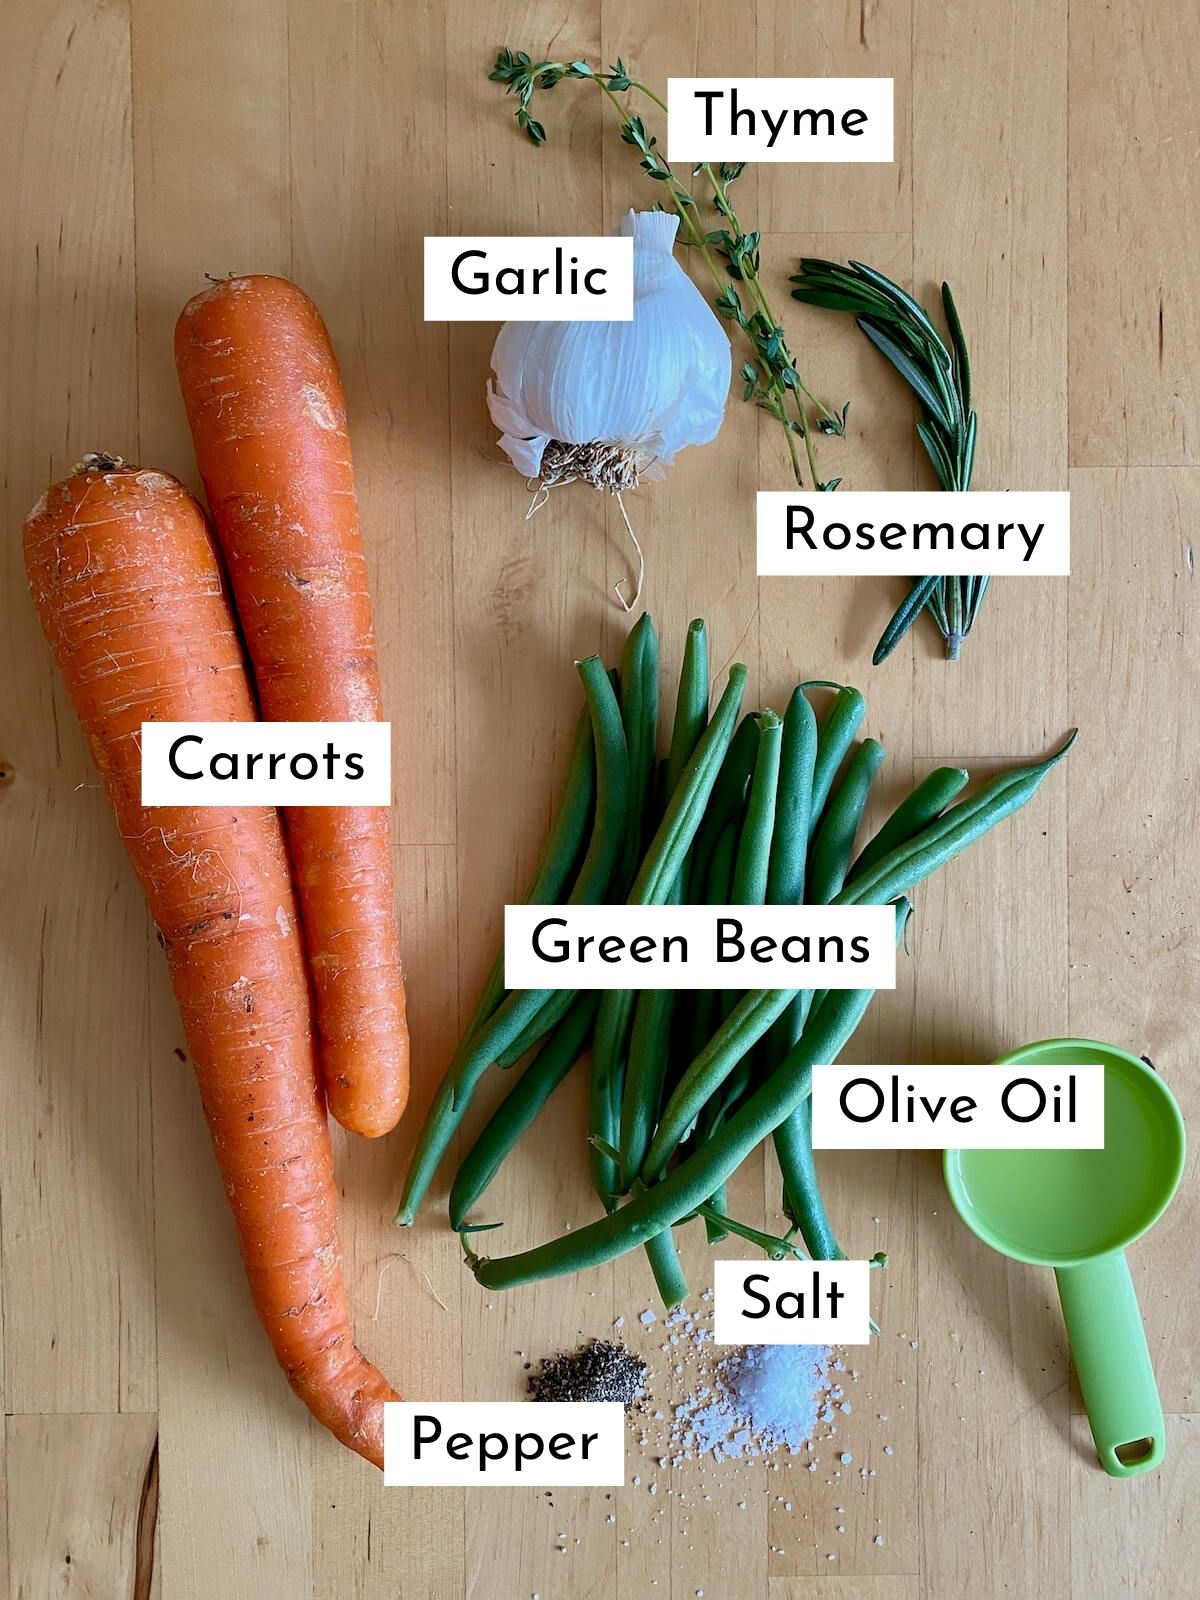 The ingredients to make roasted green beans and carrots on a butcher block countertop. Each ingredient is labeled with text stating what it is. They include carrots, green beans, garlic, thyme, rosemary, olive oil, salt, and pepper.